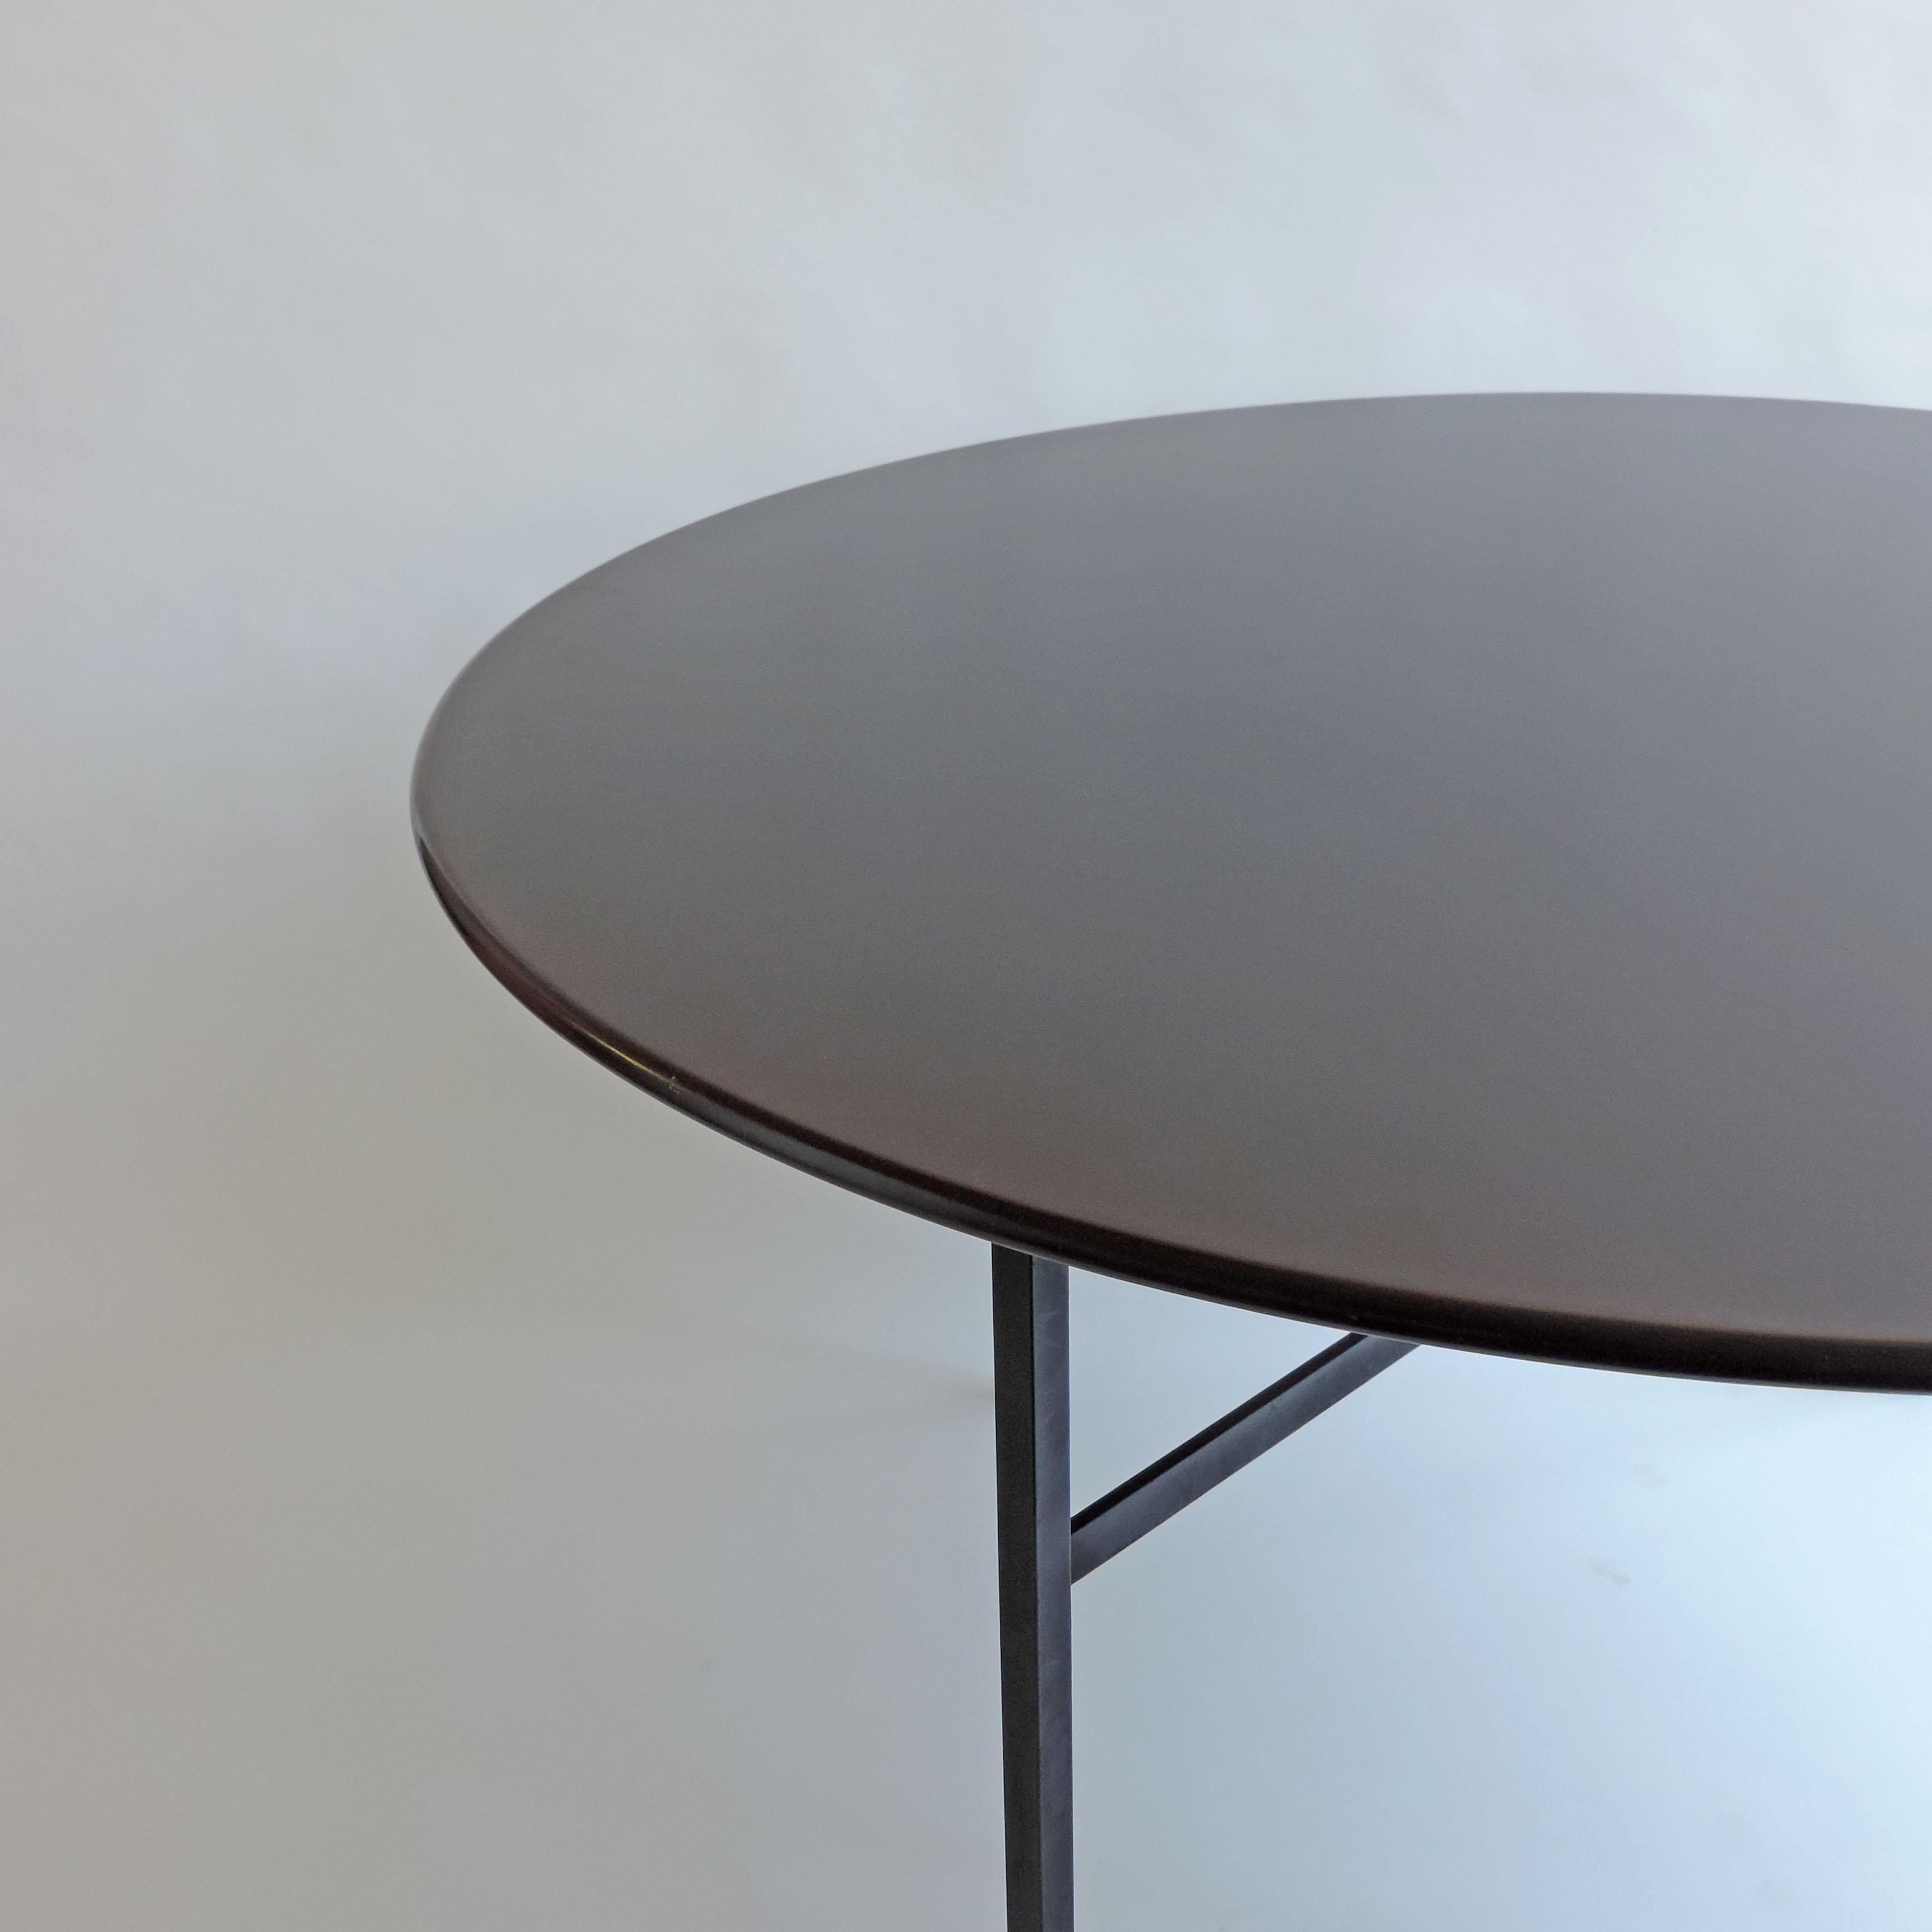 Minimal Ignazio Gardella dining table for Azucena, Italy 1960s
Similar examples are at the PAC pavillion in Milan.